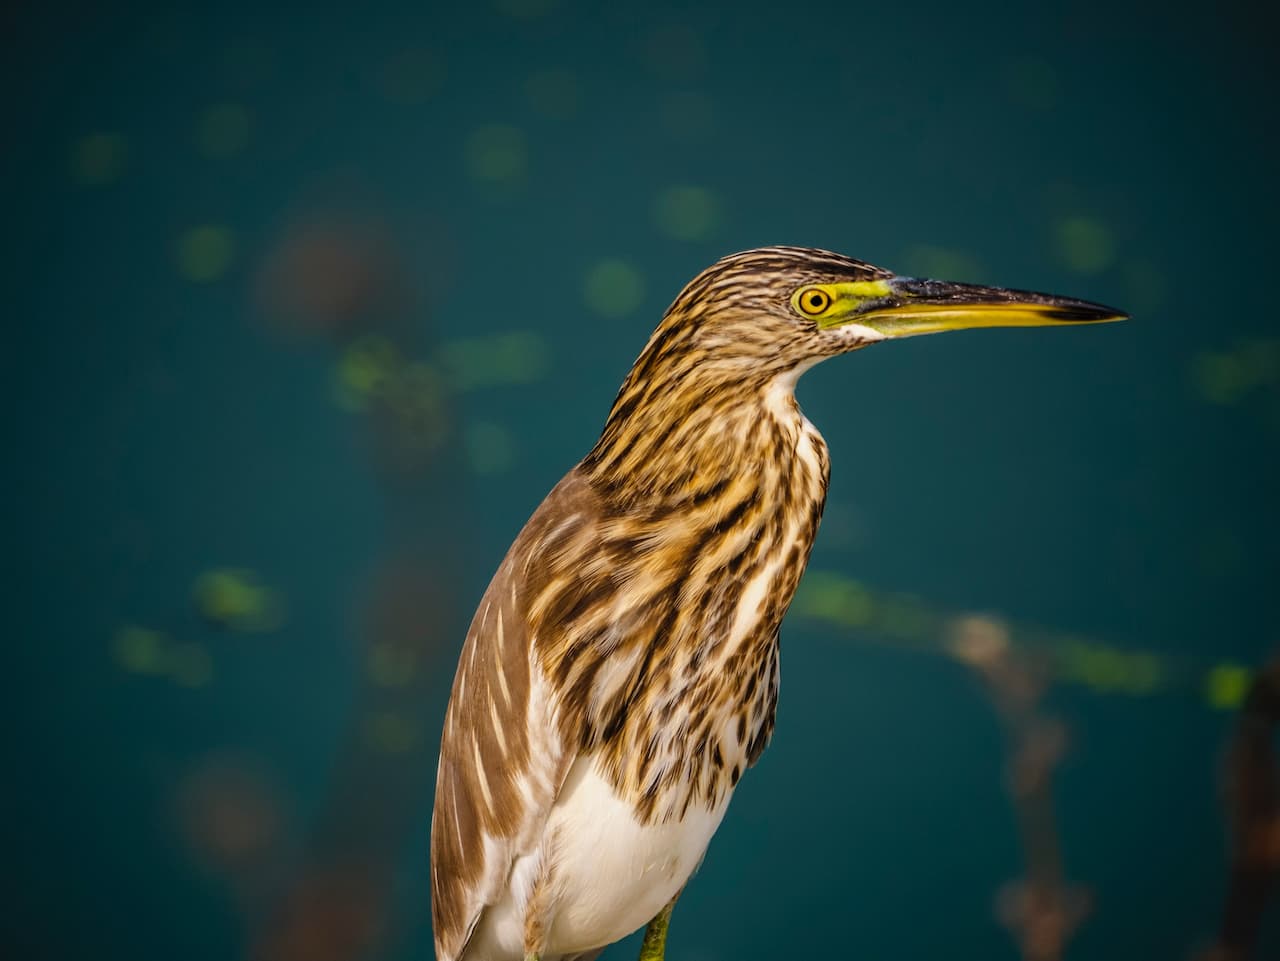 Rodrigues Night Herons have a yellow beak and a brown feather